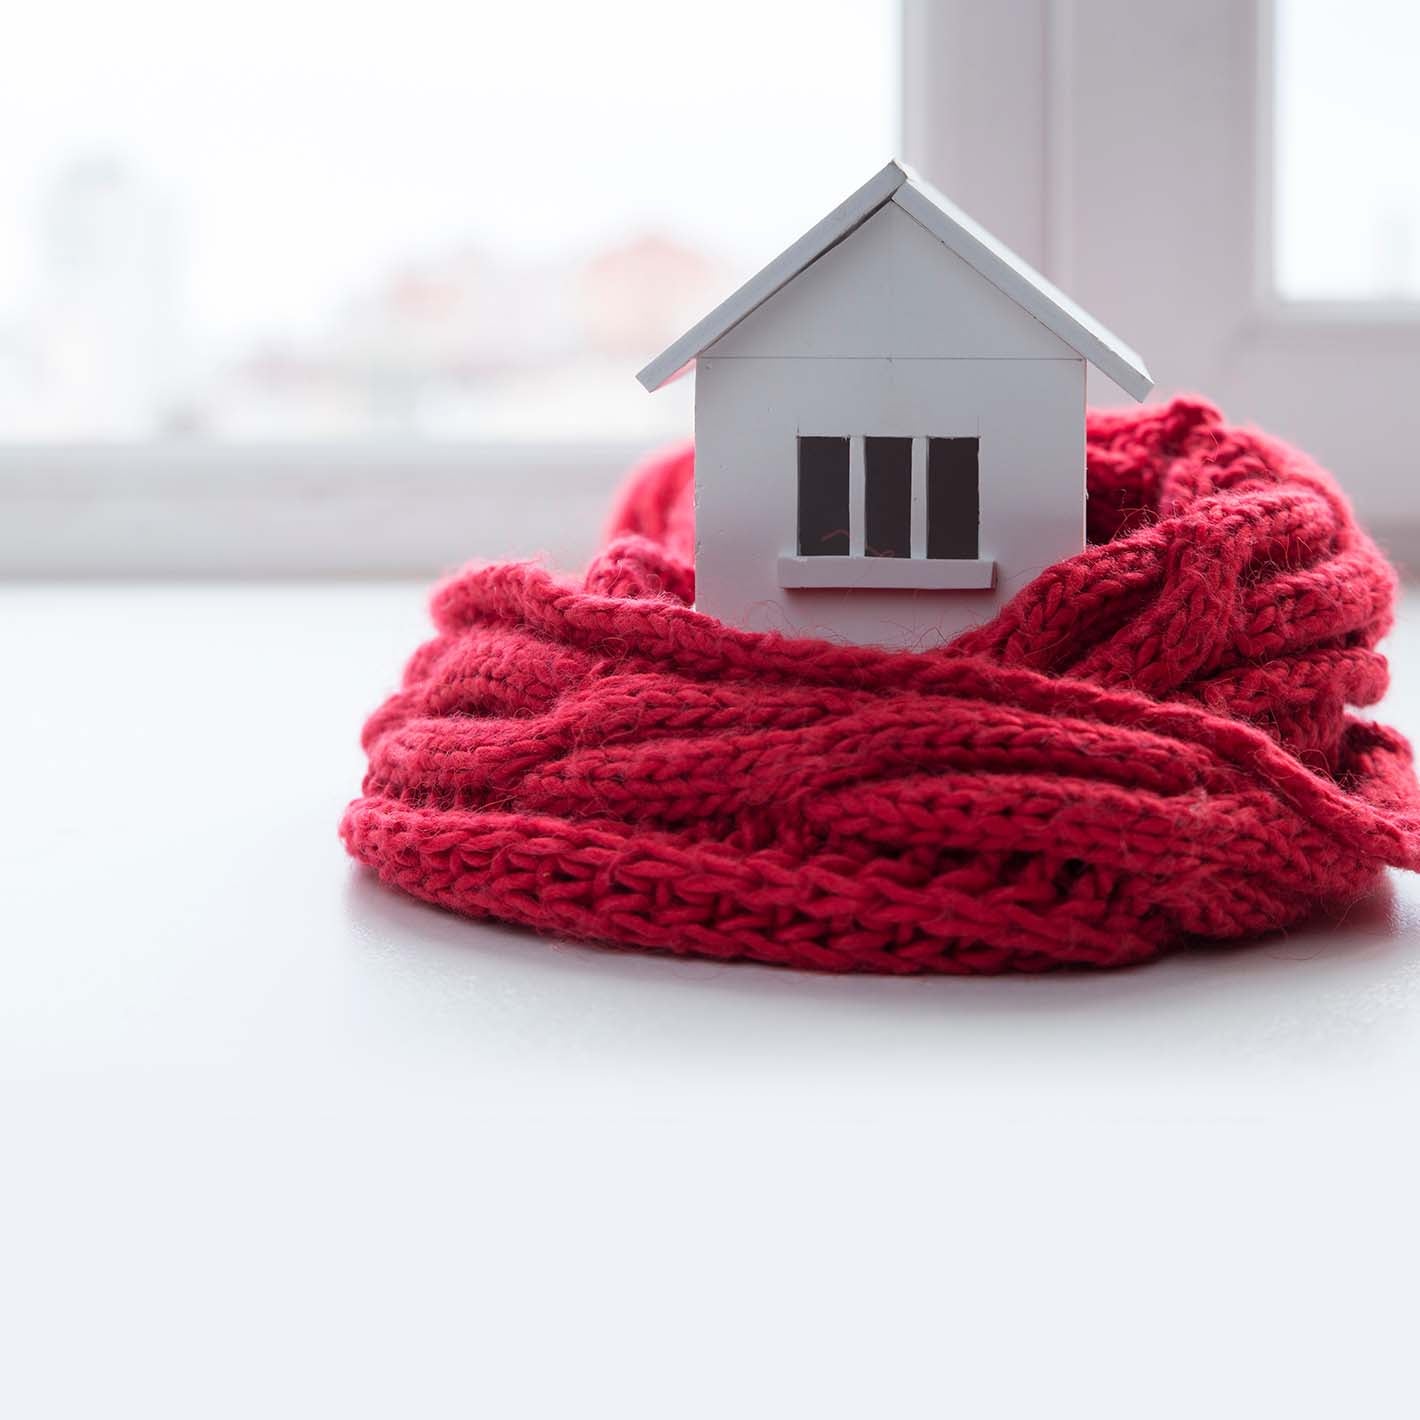 small wooden home wrapped in red scarf